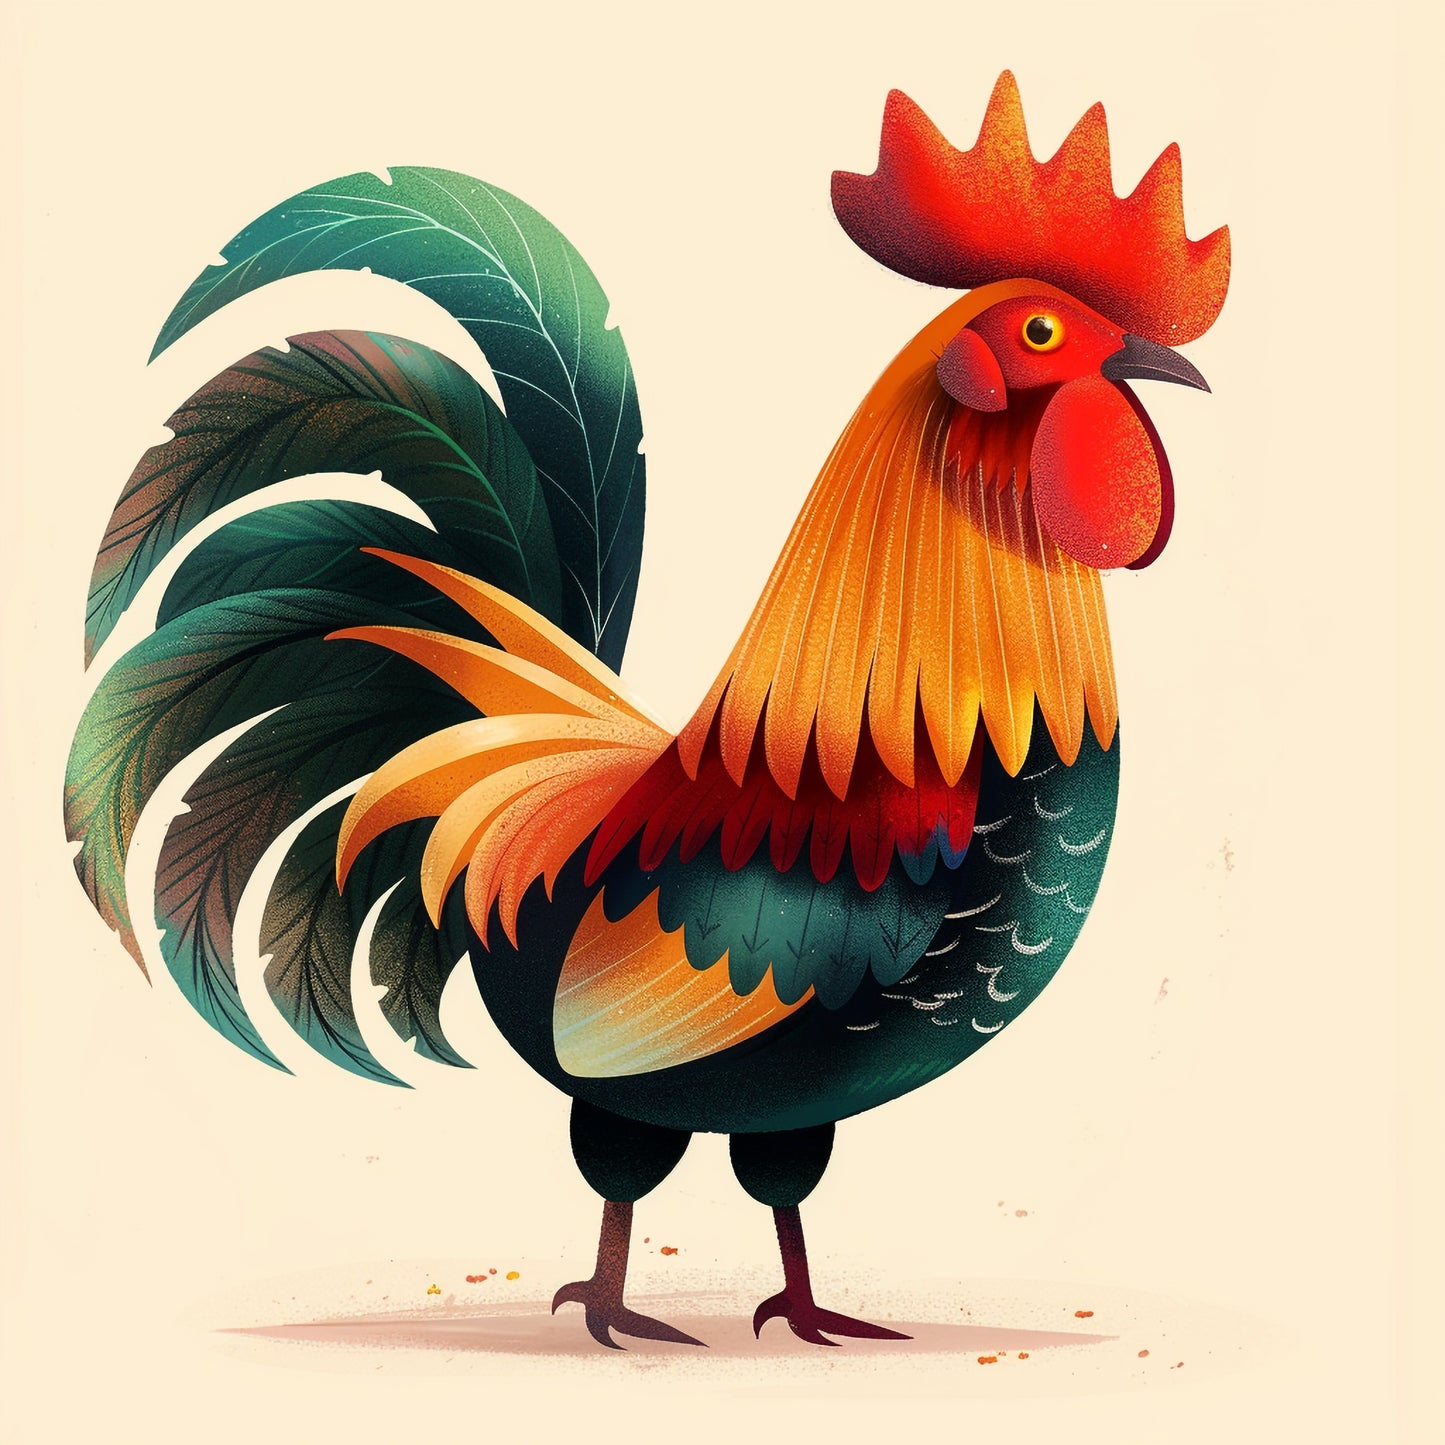 Colorful Rooster Illustration in a Bold Artistic Style